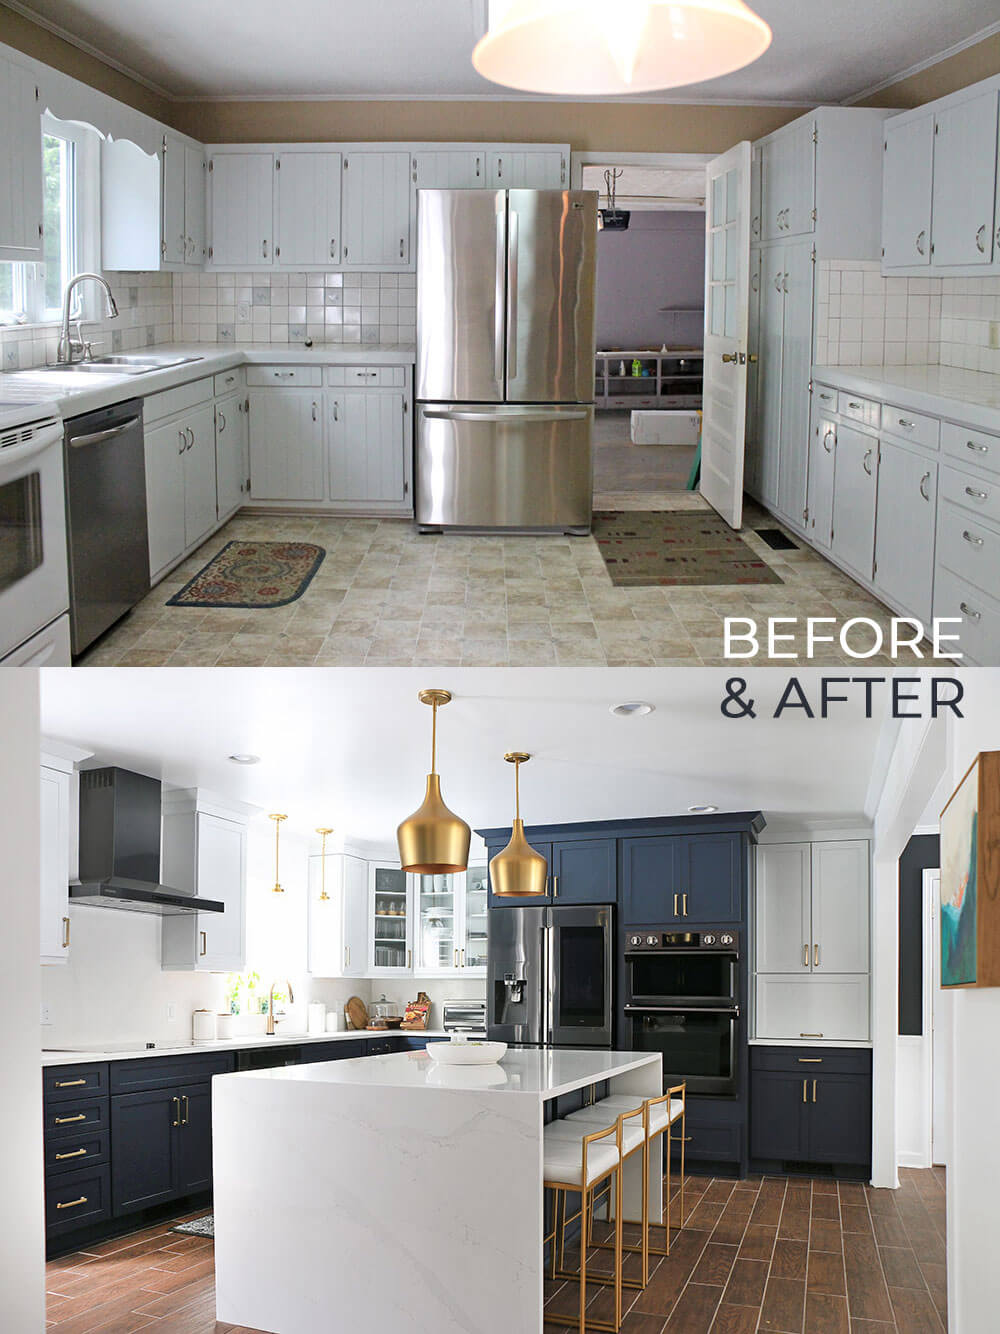 Kitchen Renovation Before And After